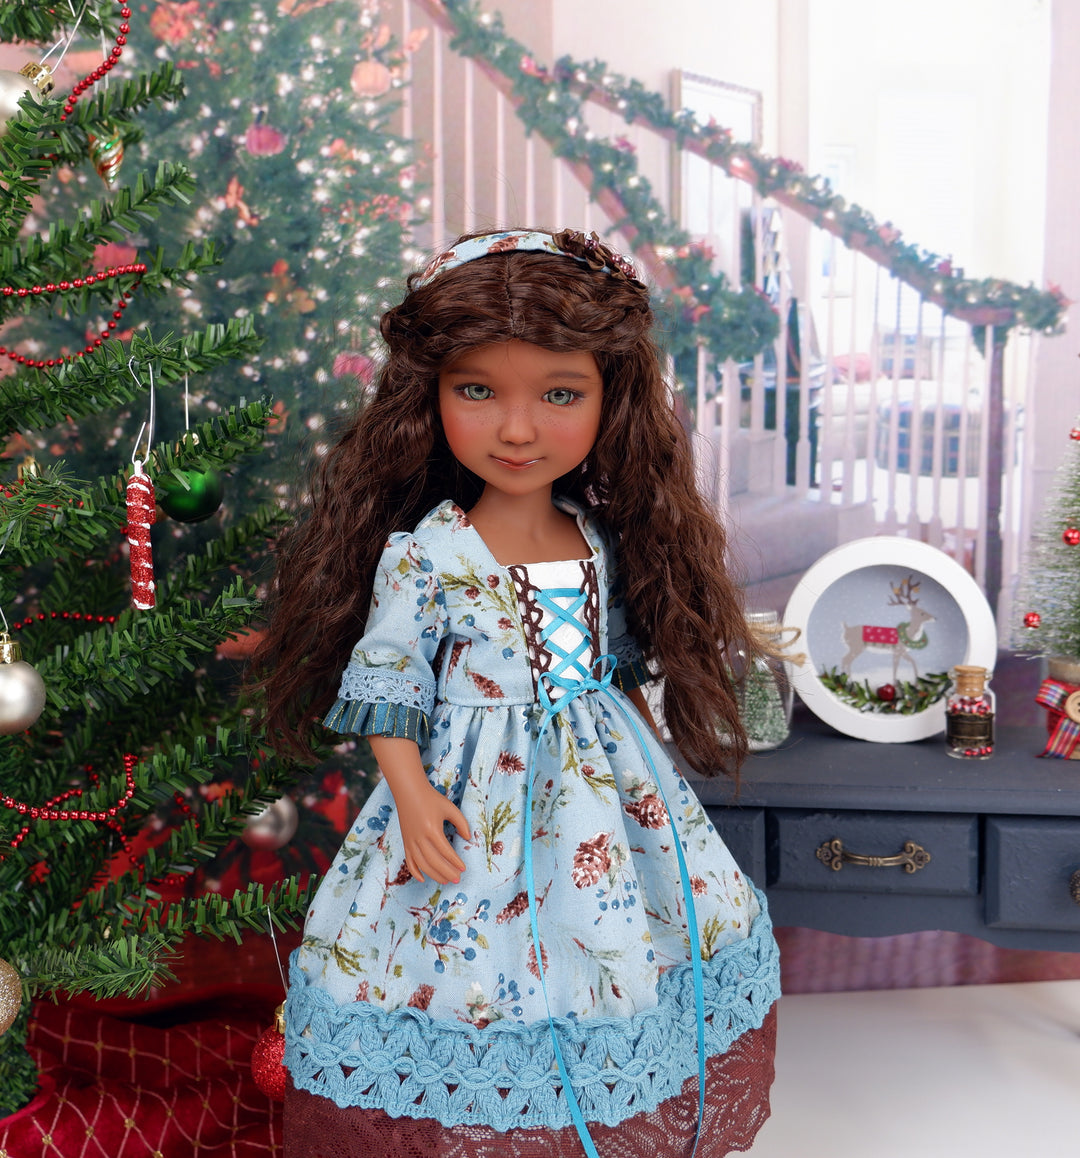 Winter Sugar Pine - dirndl dress ensemble with shoes for Ruby Red Fashion Friends doll